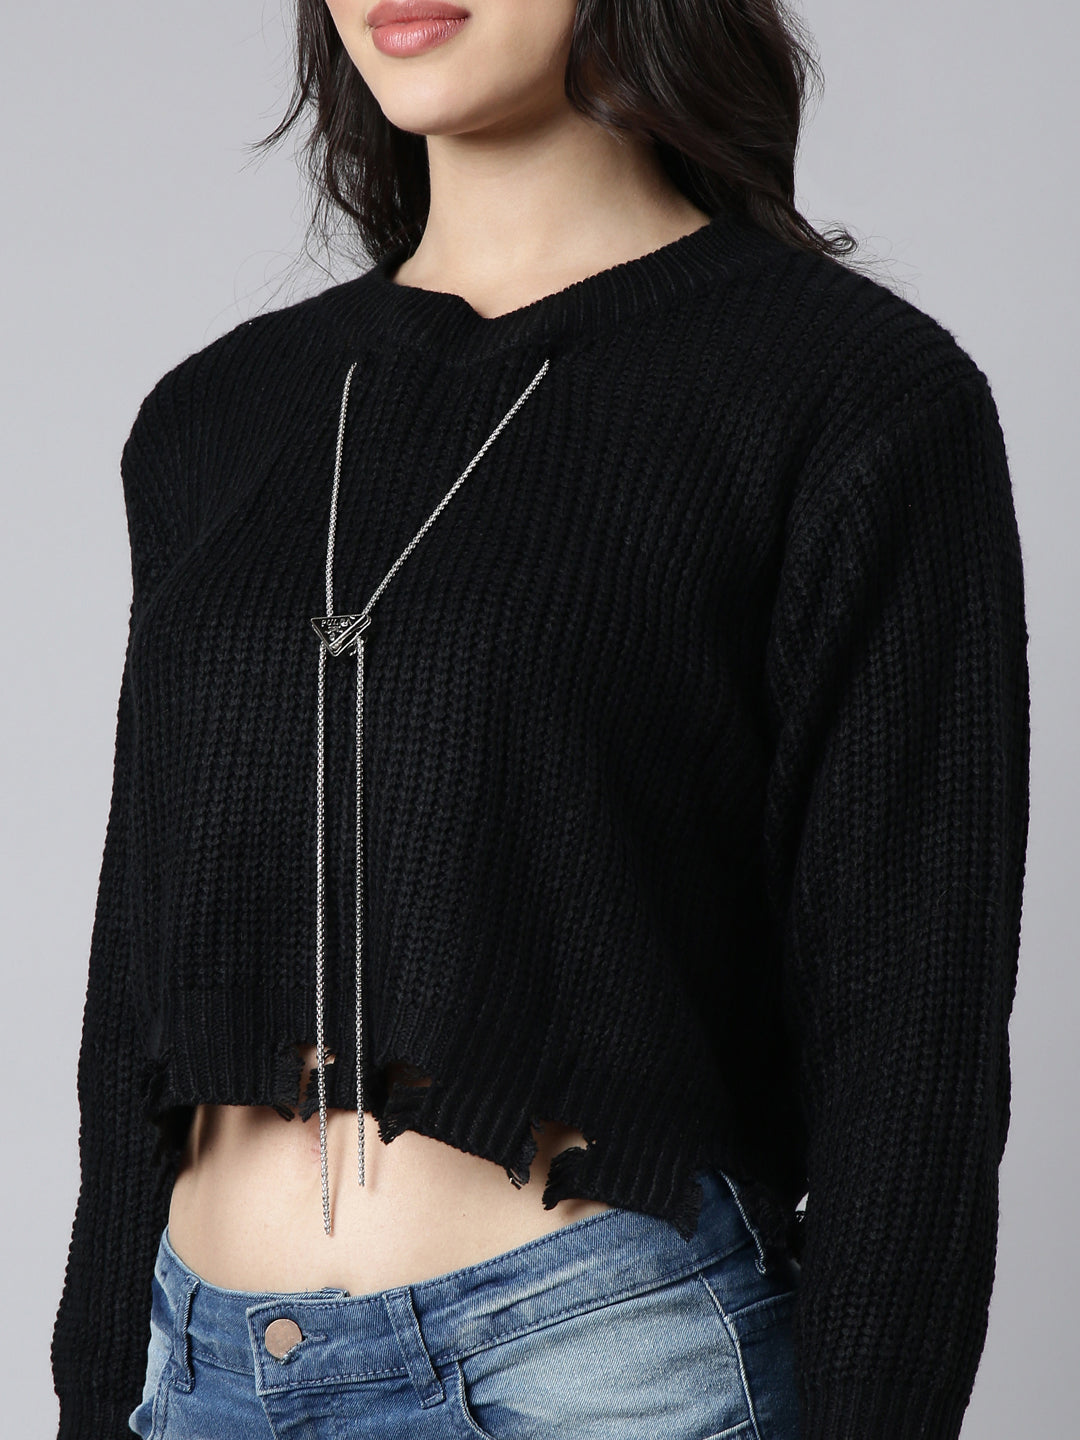 Women Solid Black Boxy Top Comes With Chain